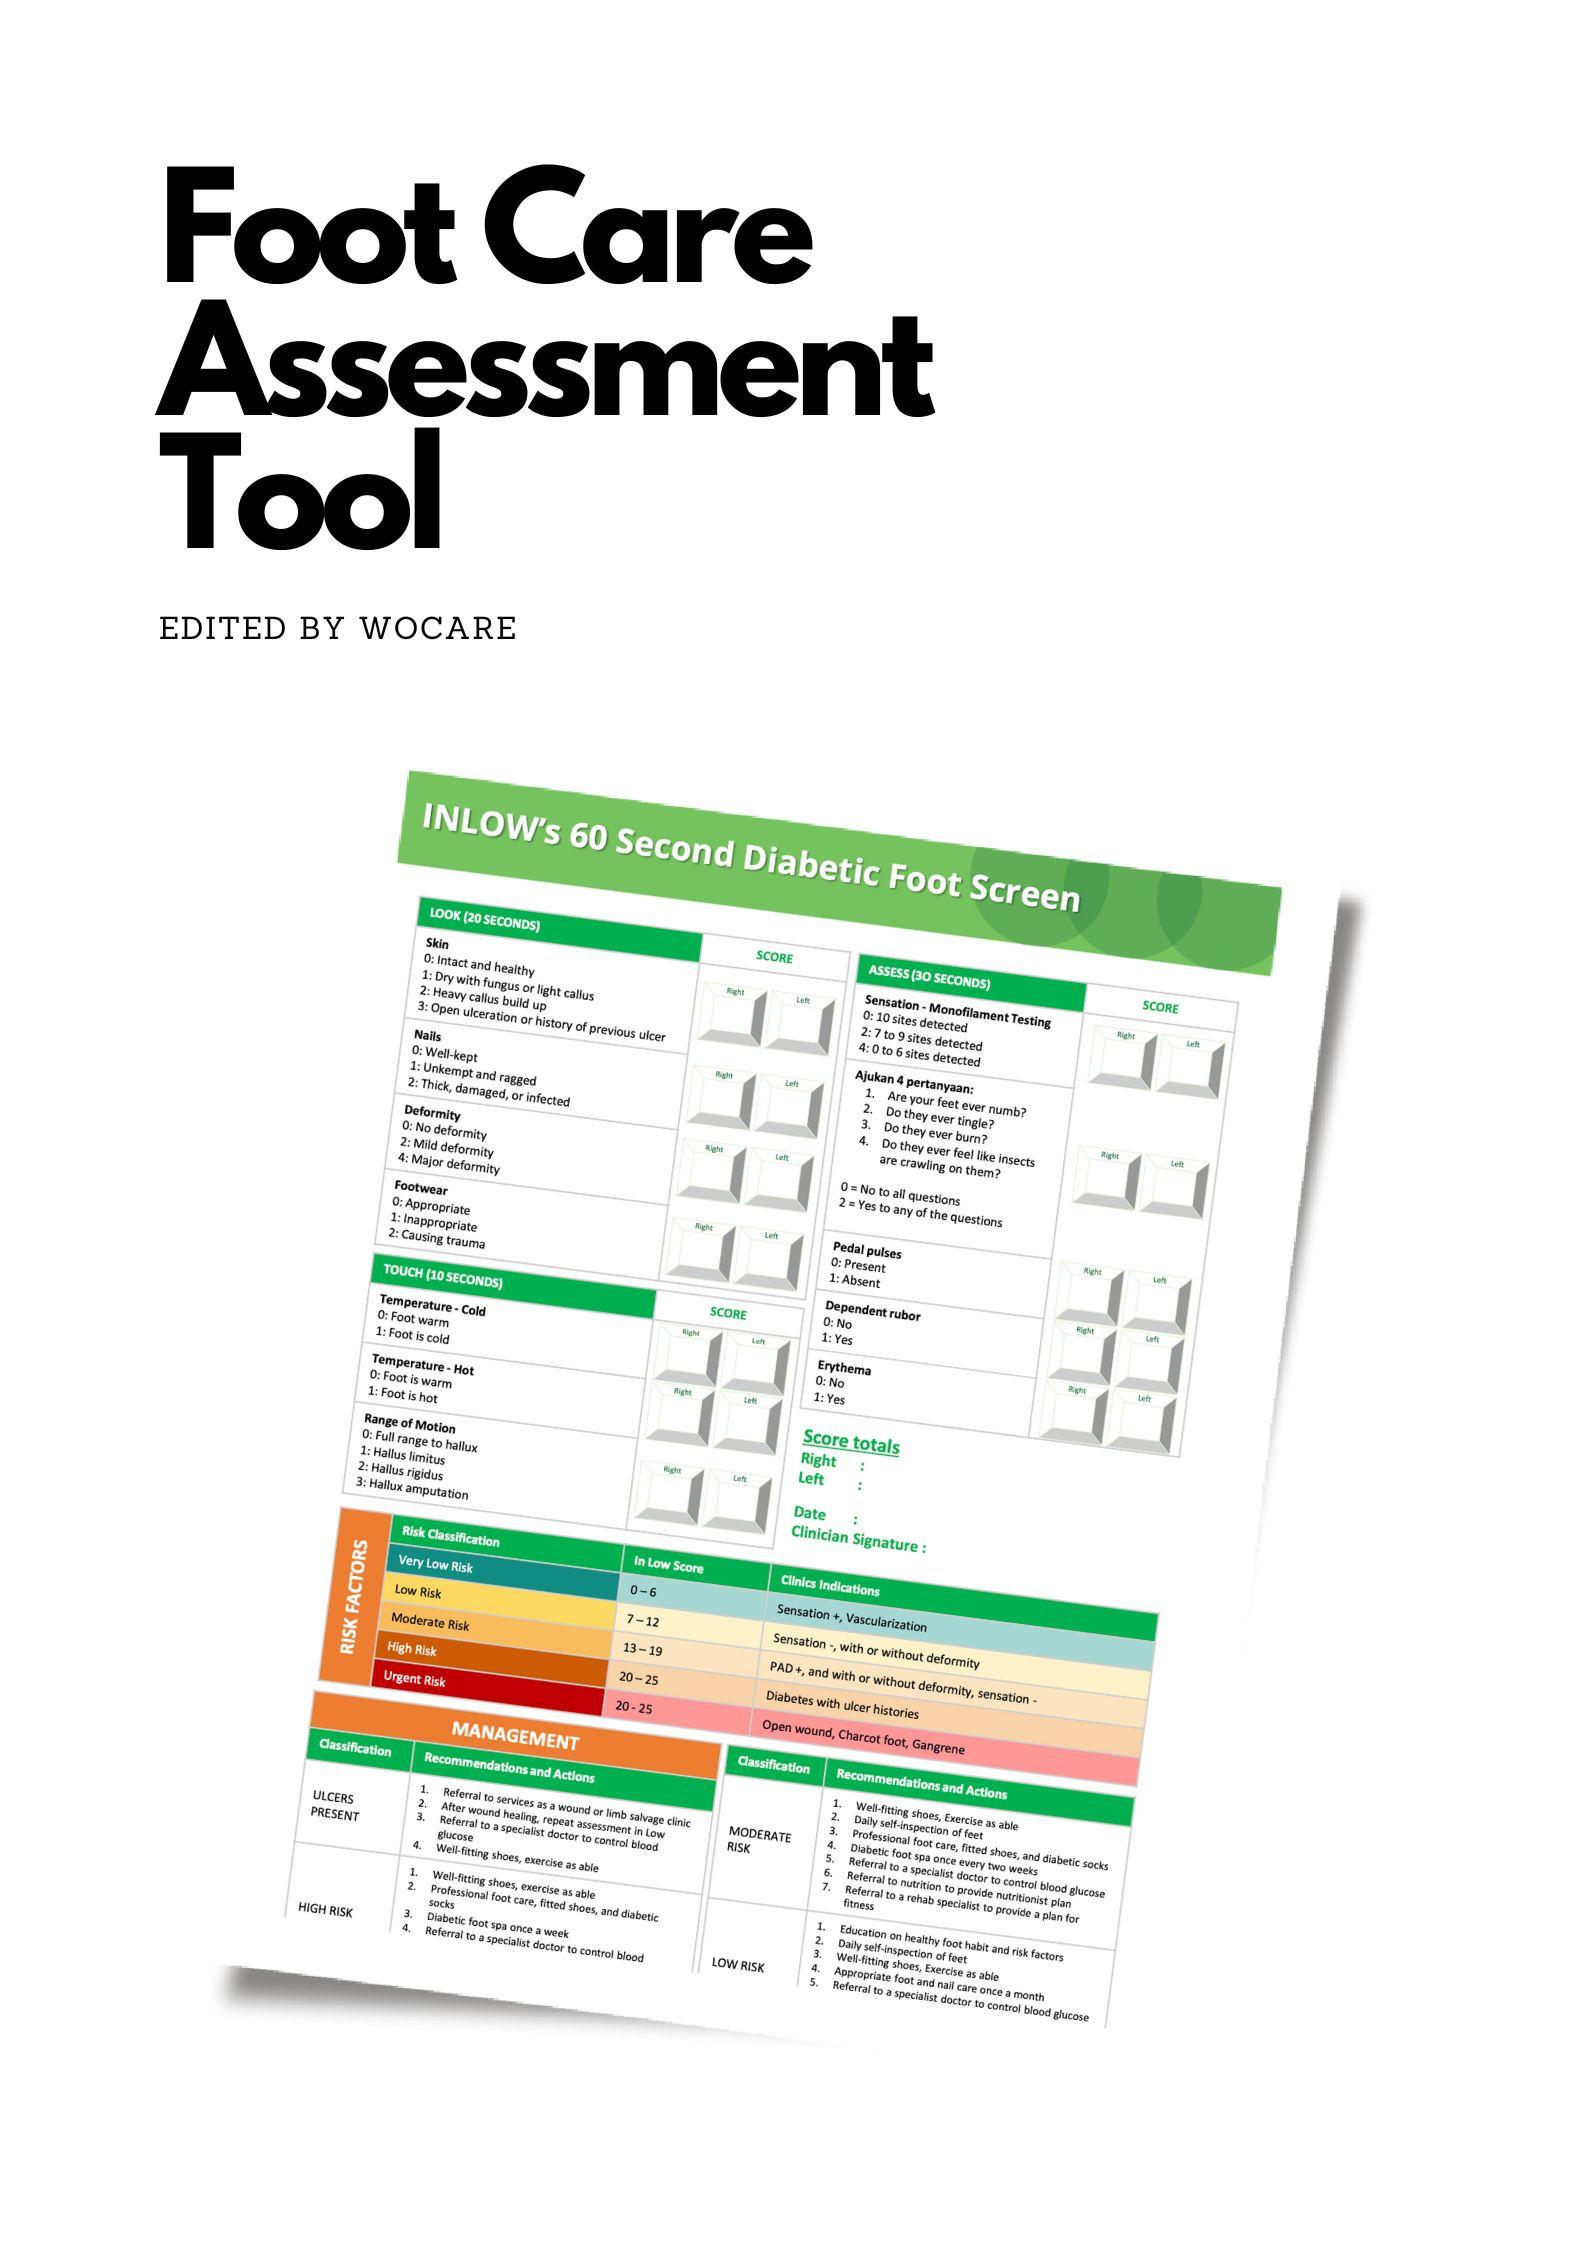 Foot Care Assessment Tools